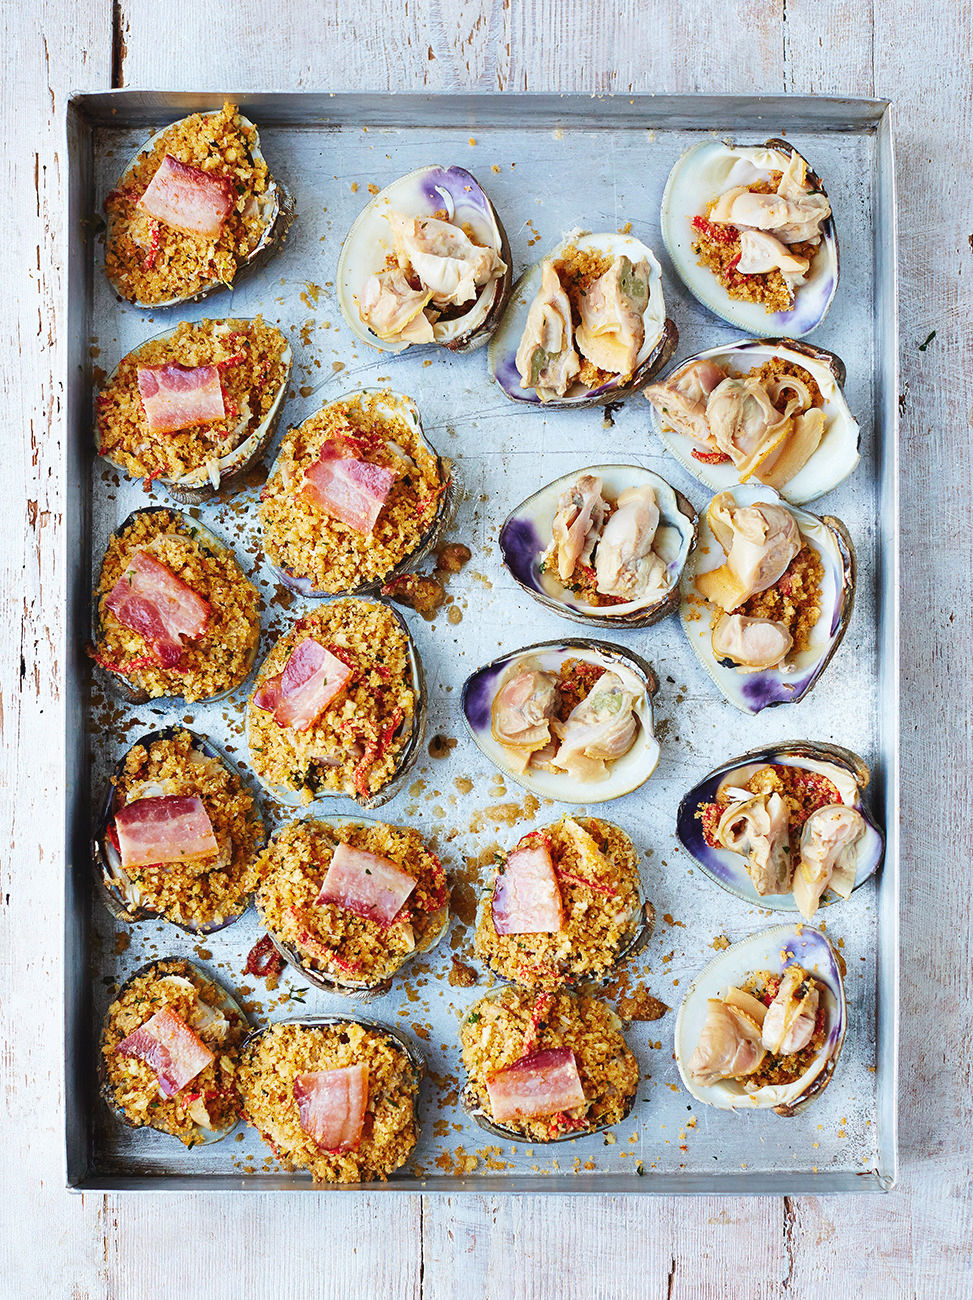 easy clams casino recipe with hot sauce